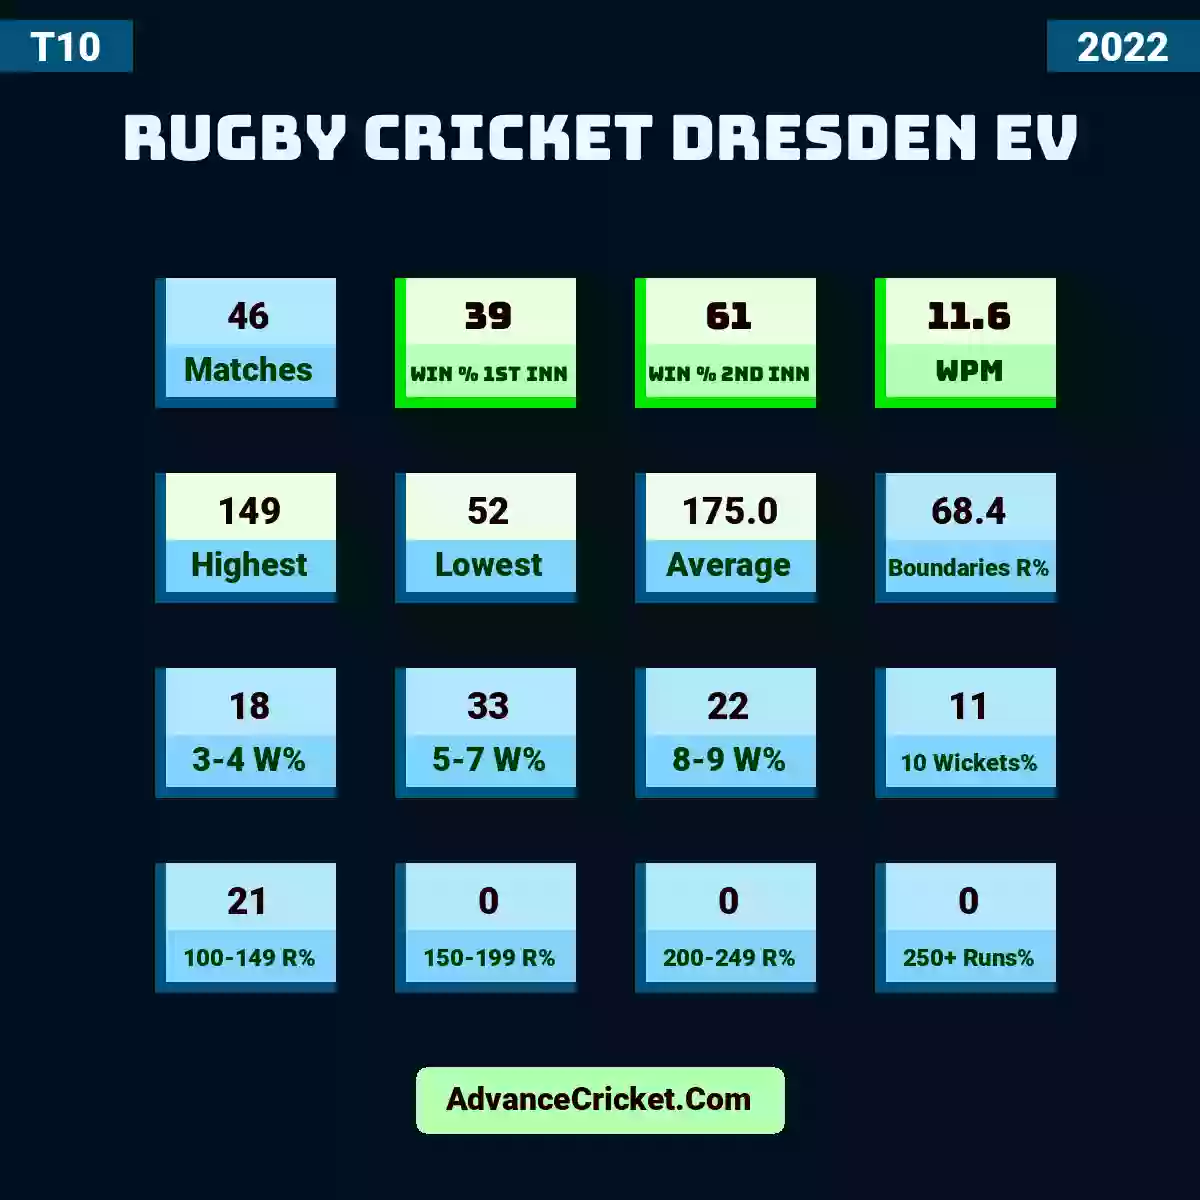 Image showing Rugby Cricket Dresden eV with Matches: 46, Win % 1st Inn: 39, Win % 2nd Inn: 61, WPM: 11.6, Highest: 149, Lowest: 52, Average: 175.0, Boundaries R%: 68.4, 3-4 W%: 18, 5-7 W%: 33, 8-9 W%: 22, 10 Wickets%: 11, 100-149 R%: 21, 150-199 R%: 0, 200-249 R%: 0, 250+ Runs%: 0.